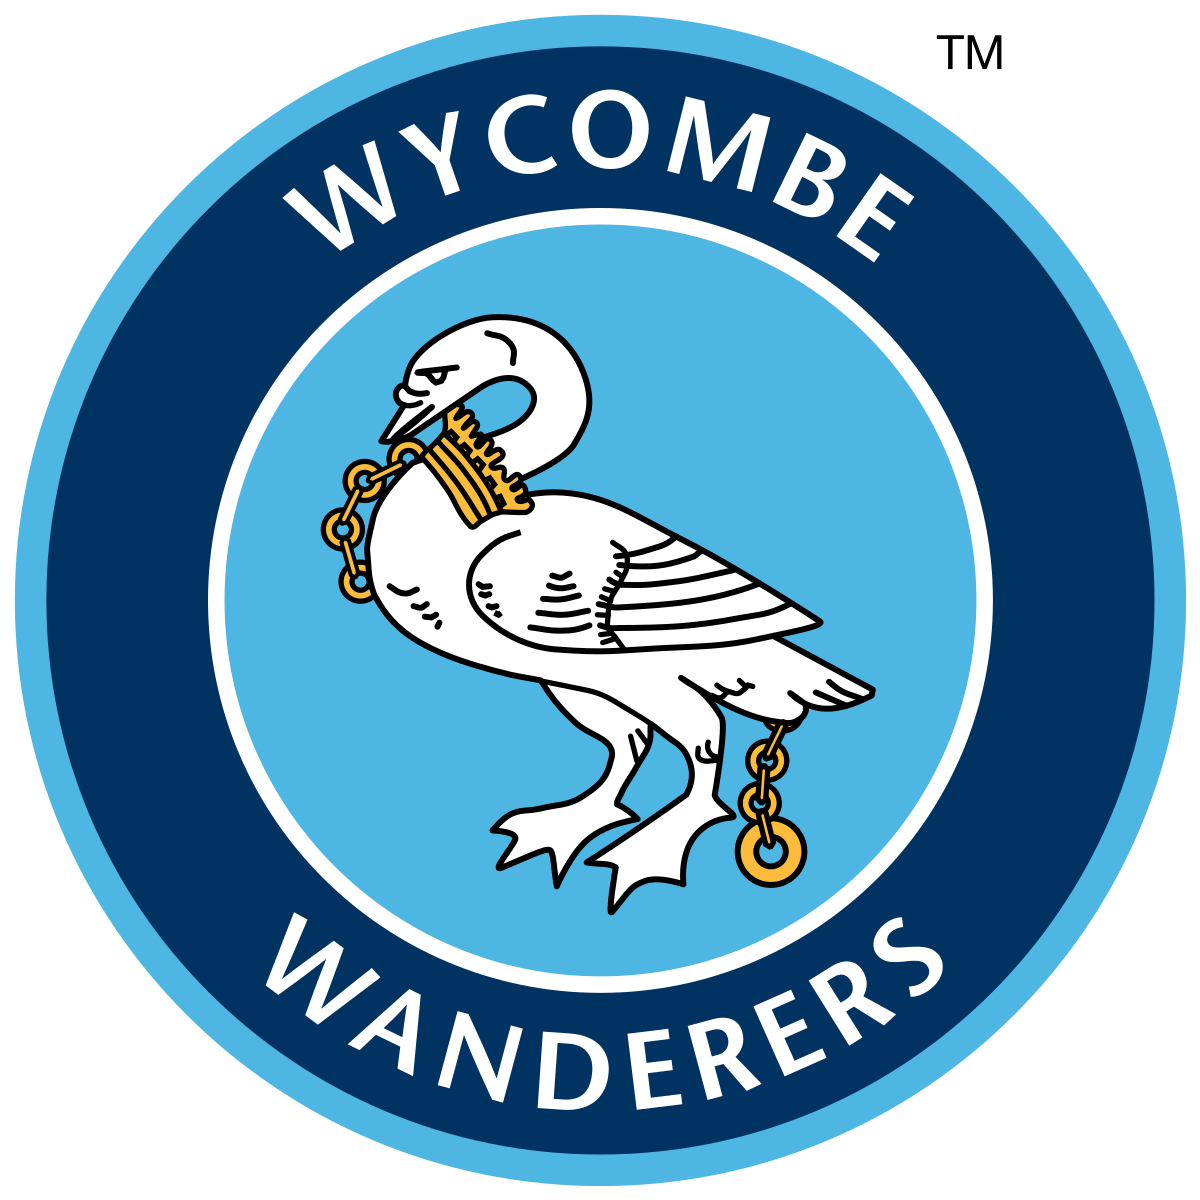 Image result for wycombe wanderers badge